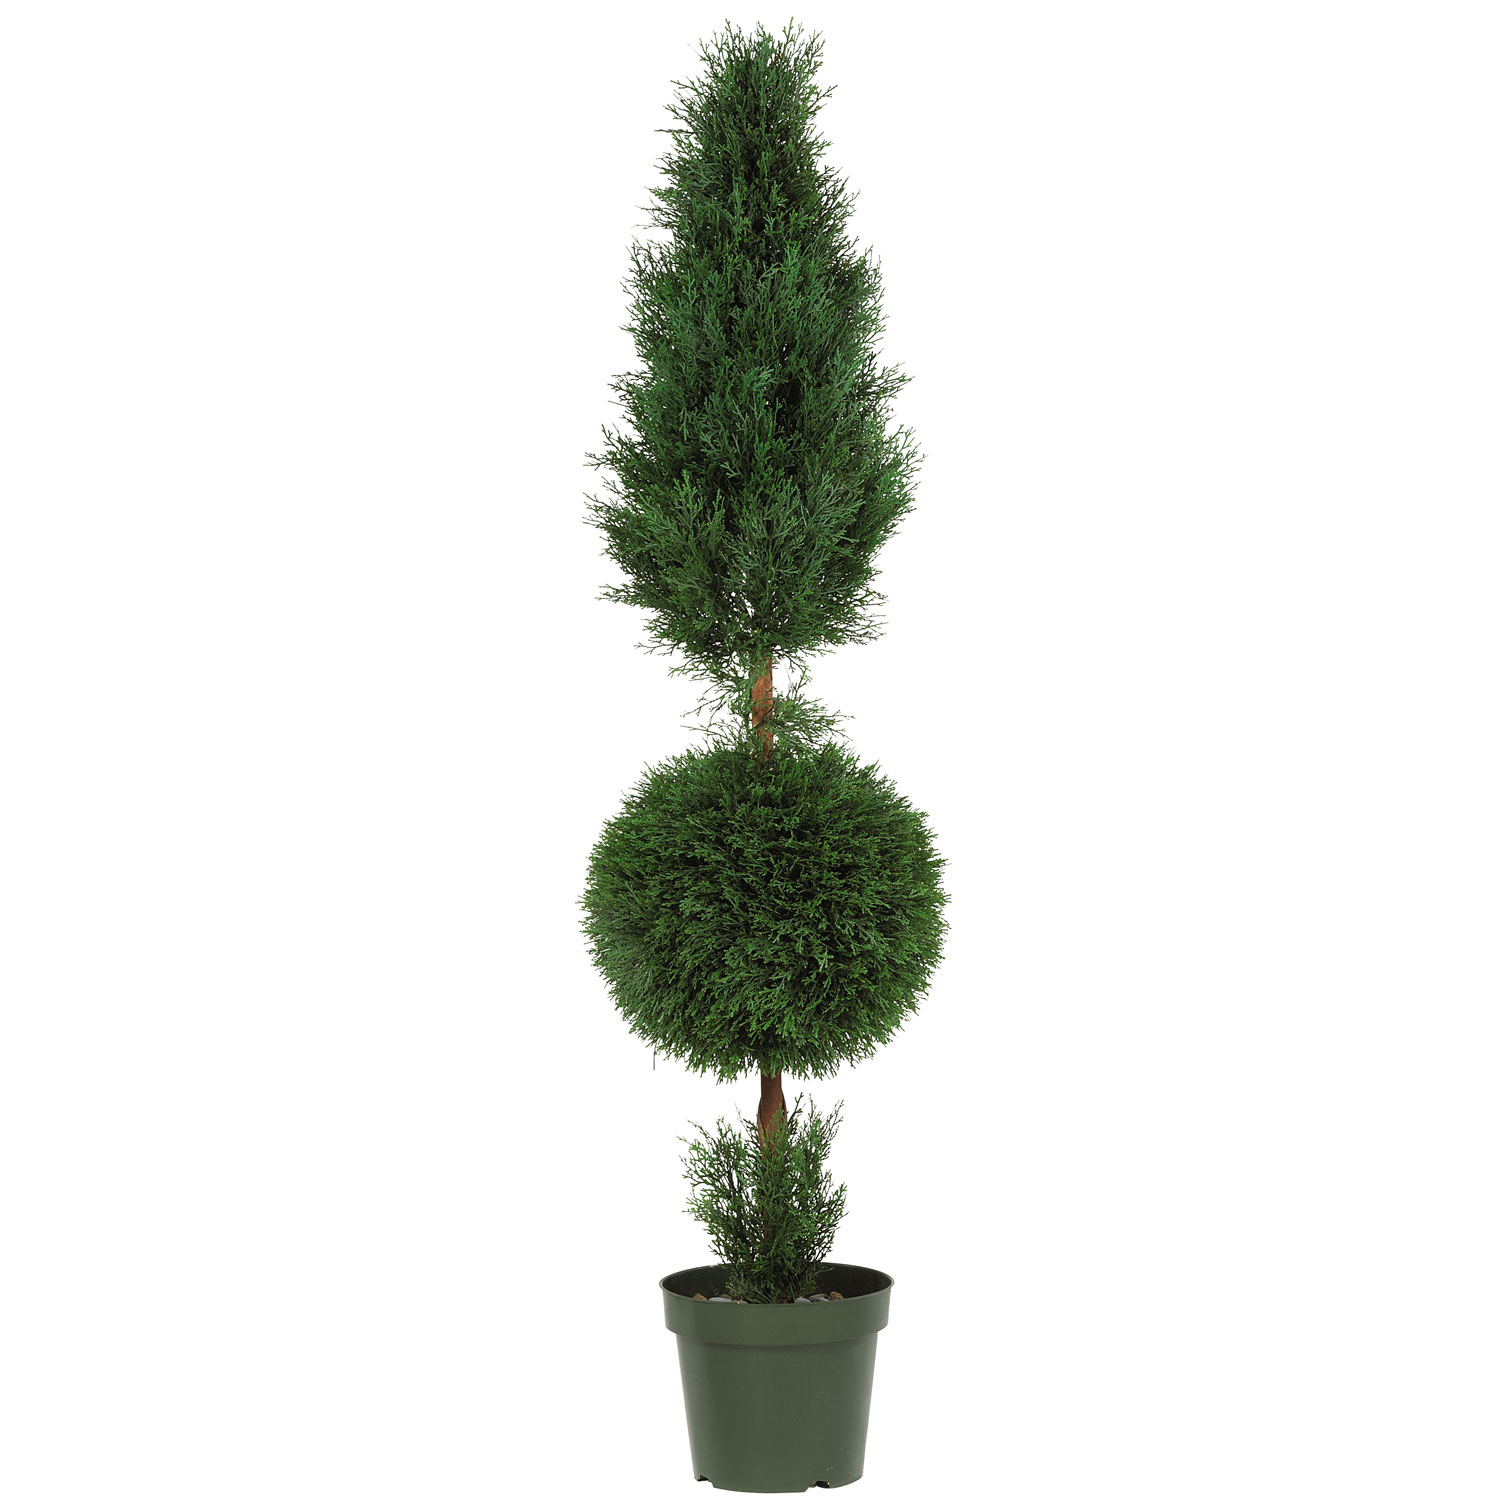 5 Foot Outdoor Cypress Ball And Cone Topiary: Potted